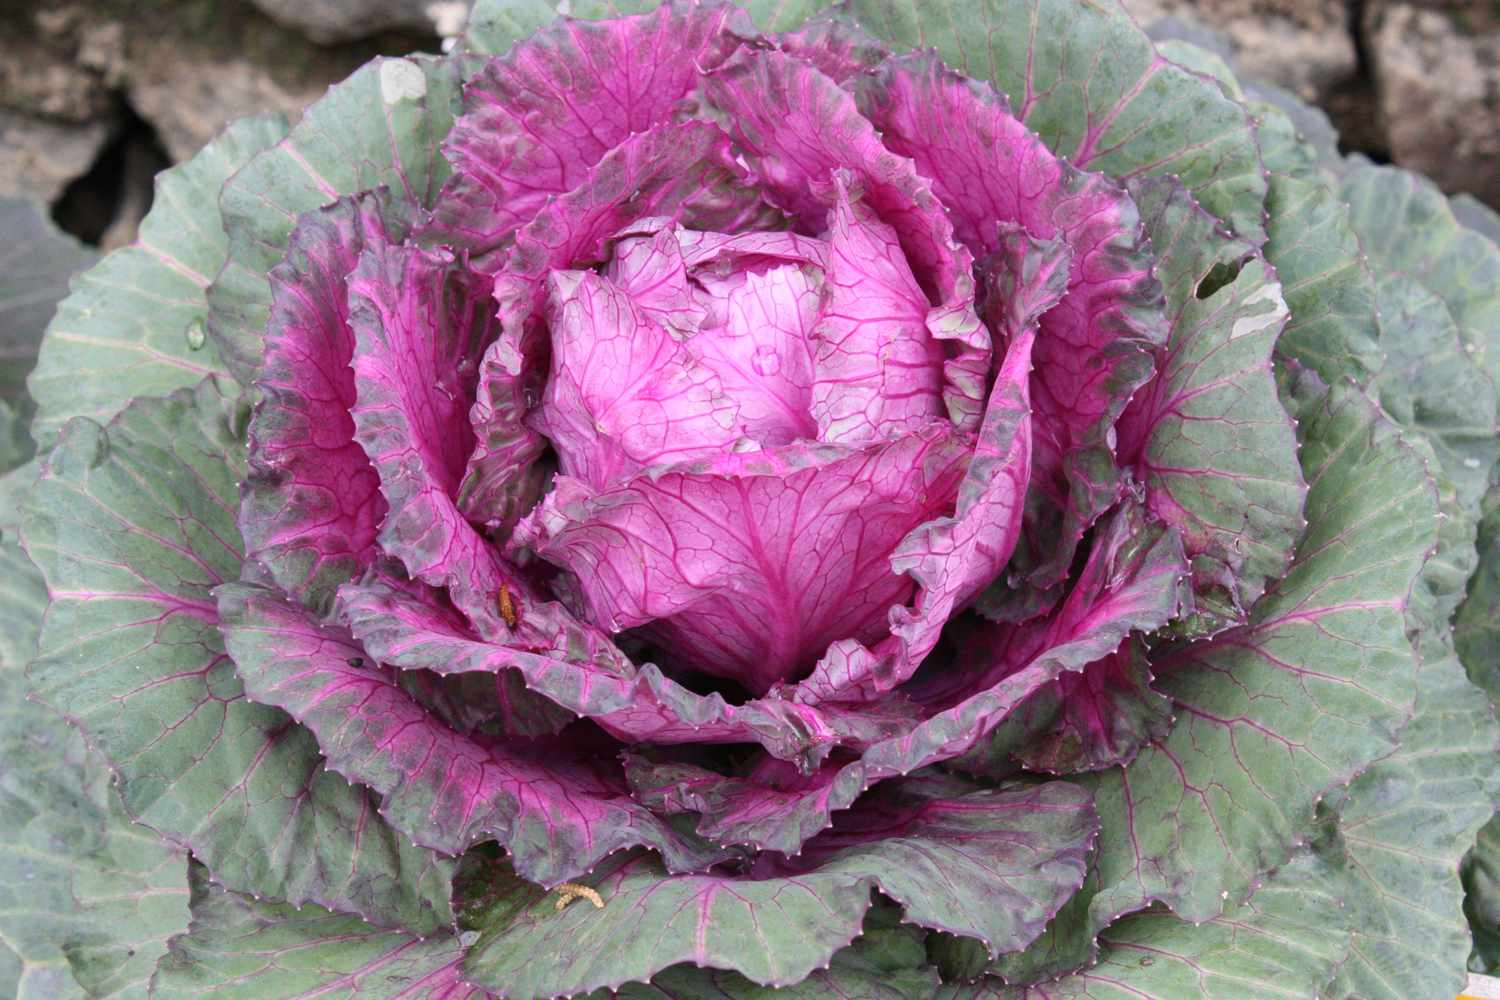 'Tokyo Red' ornamental cabbage with pink center